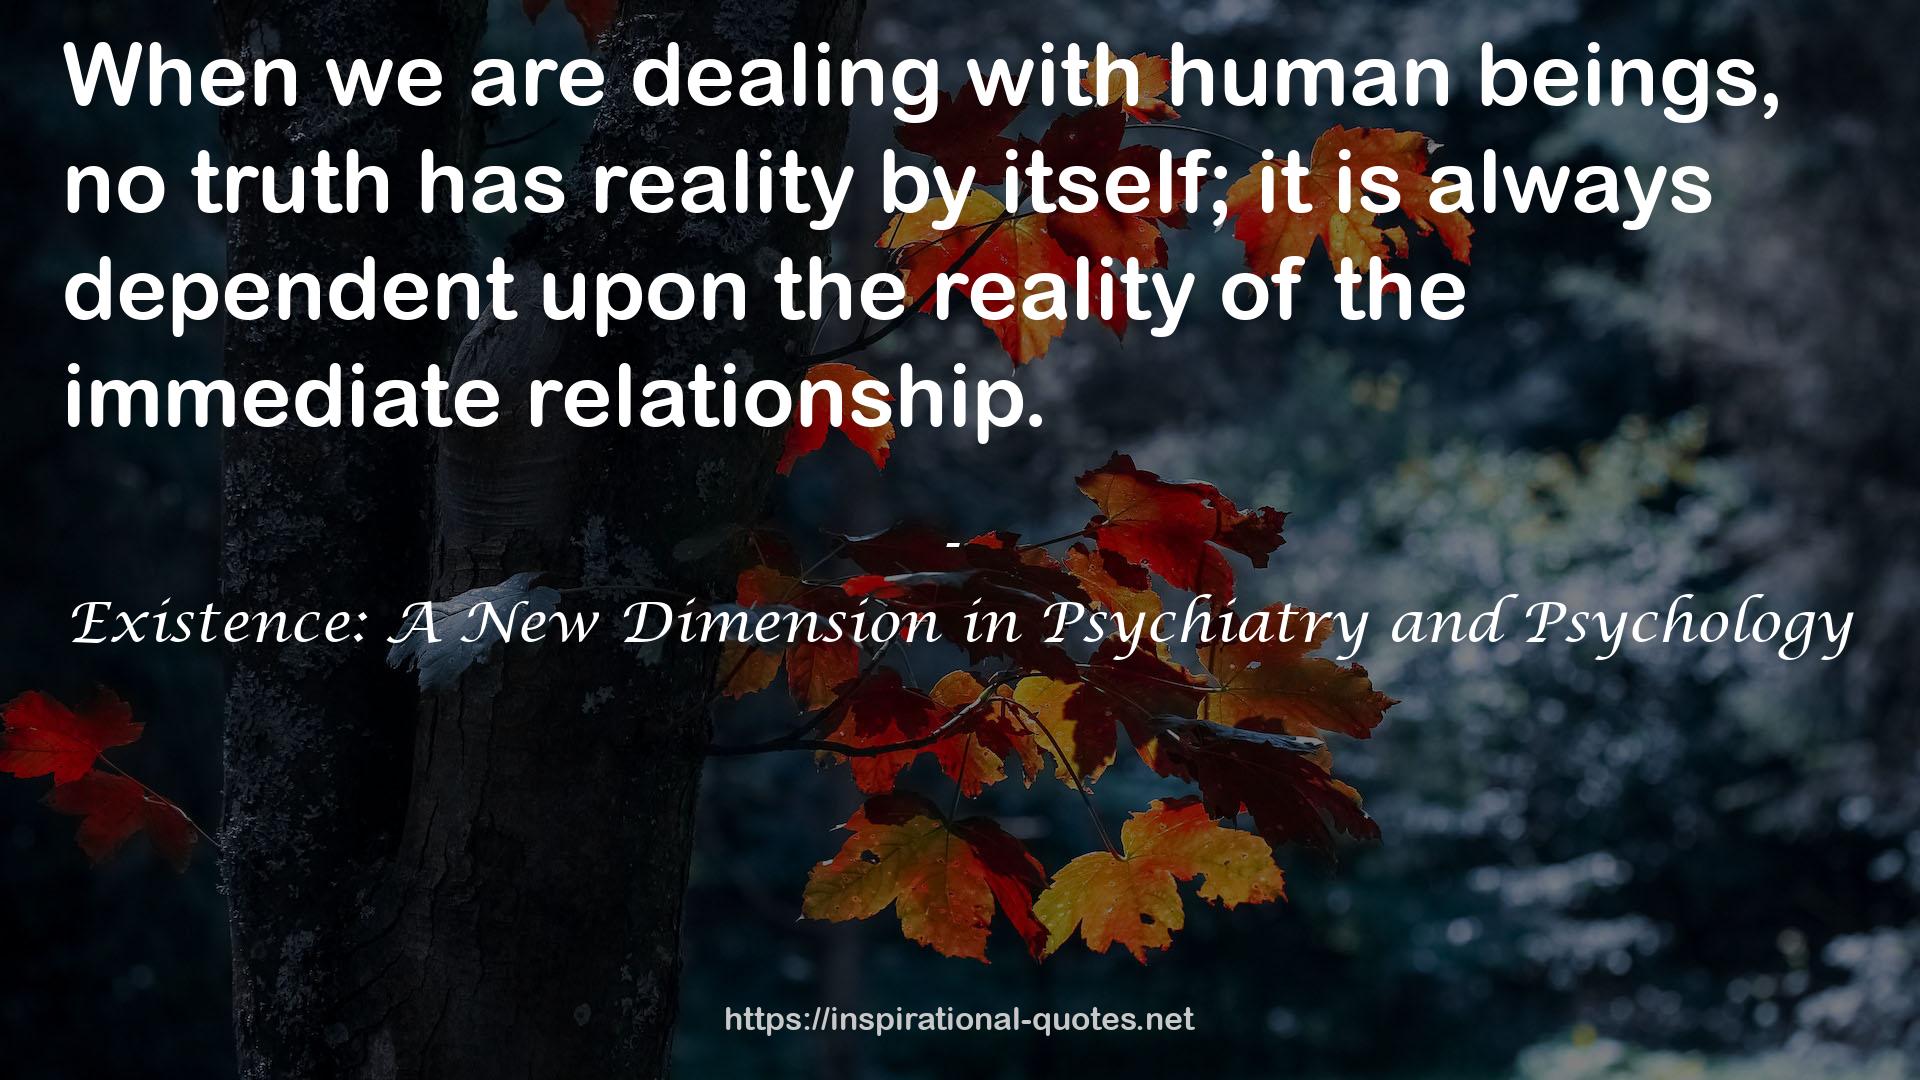 Existence: A New Dimension in Psychiatry and Psychology QUOTES